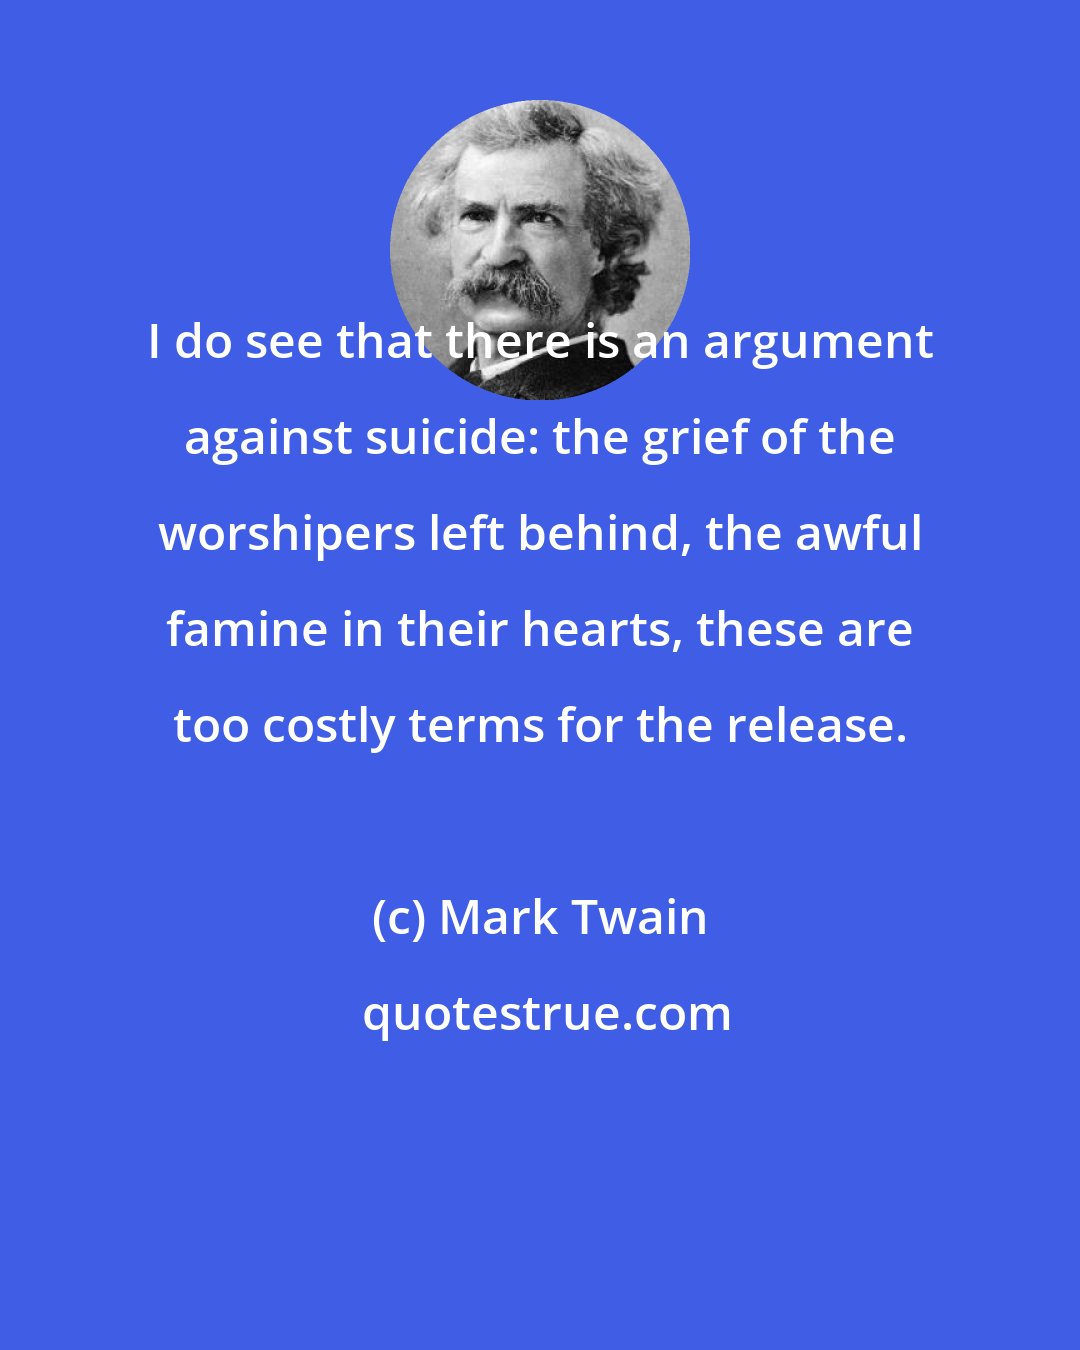 Mark Twain: I do see that there is an argument against suicide: the grief of the worshipers left behind, the awful famine in their hearts, these are too costly terms for the release.